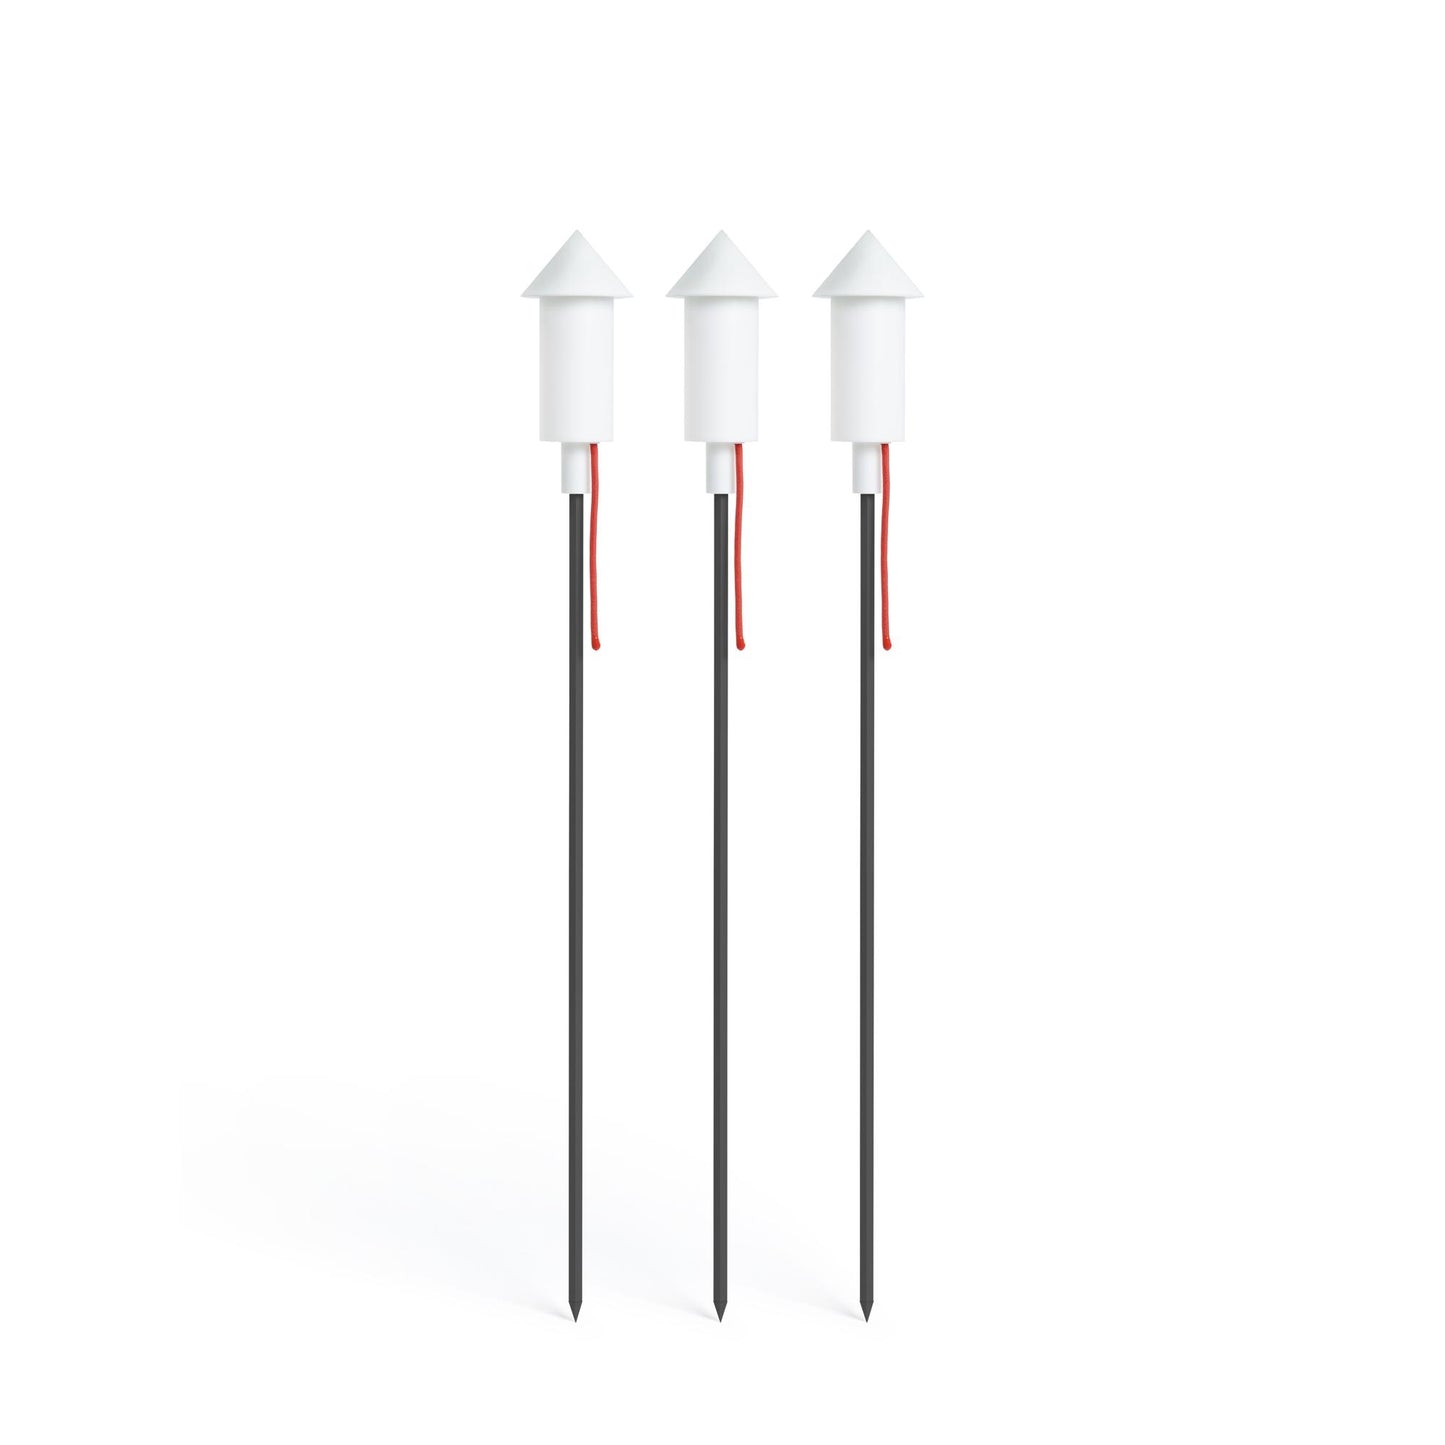 Prêt A Racket 3 Pcs. Floor Lamp by Fatboy #White